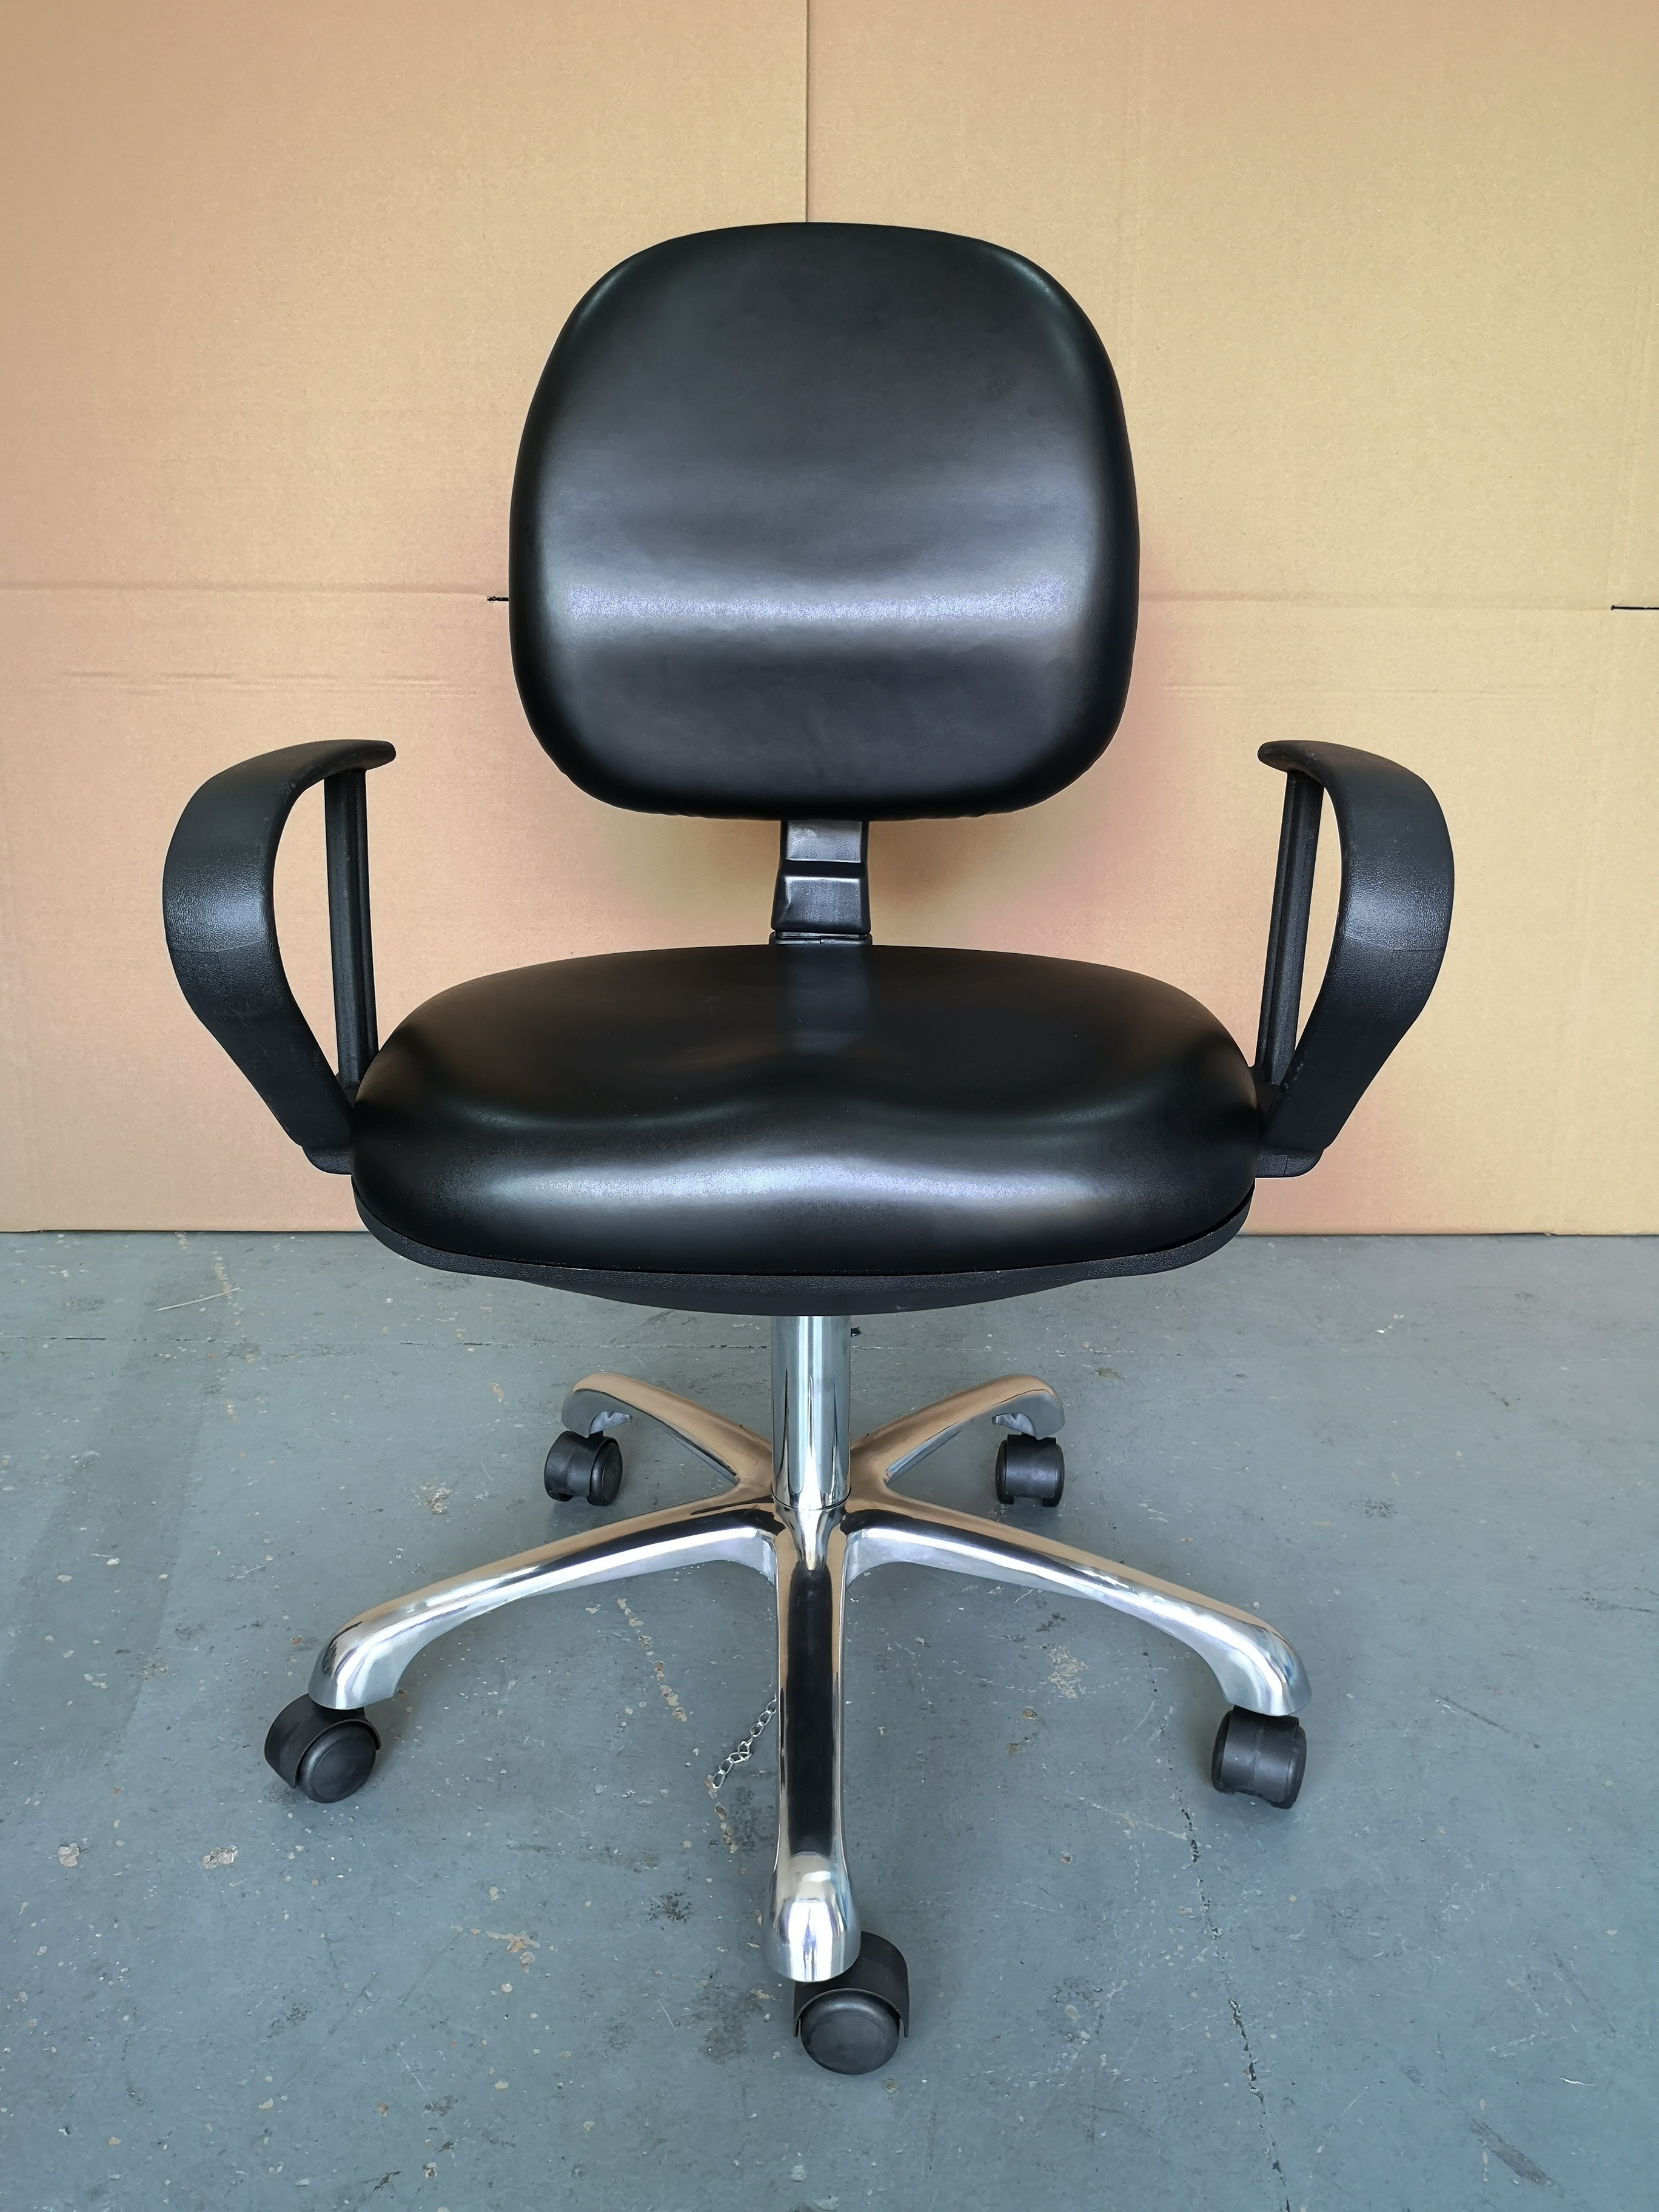 High Strength ESD Chairs With Armrest Multi Functional Seat Size 420 * 400mm